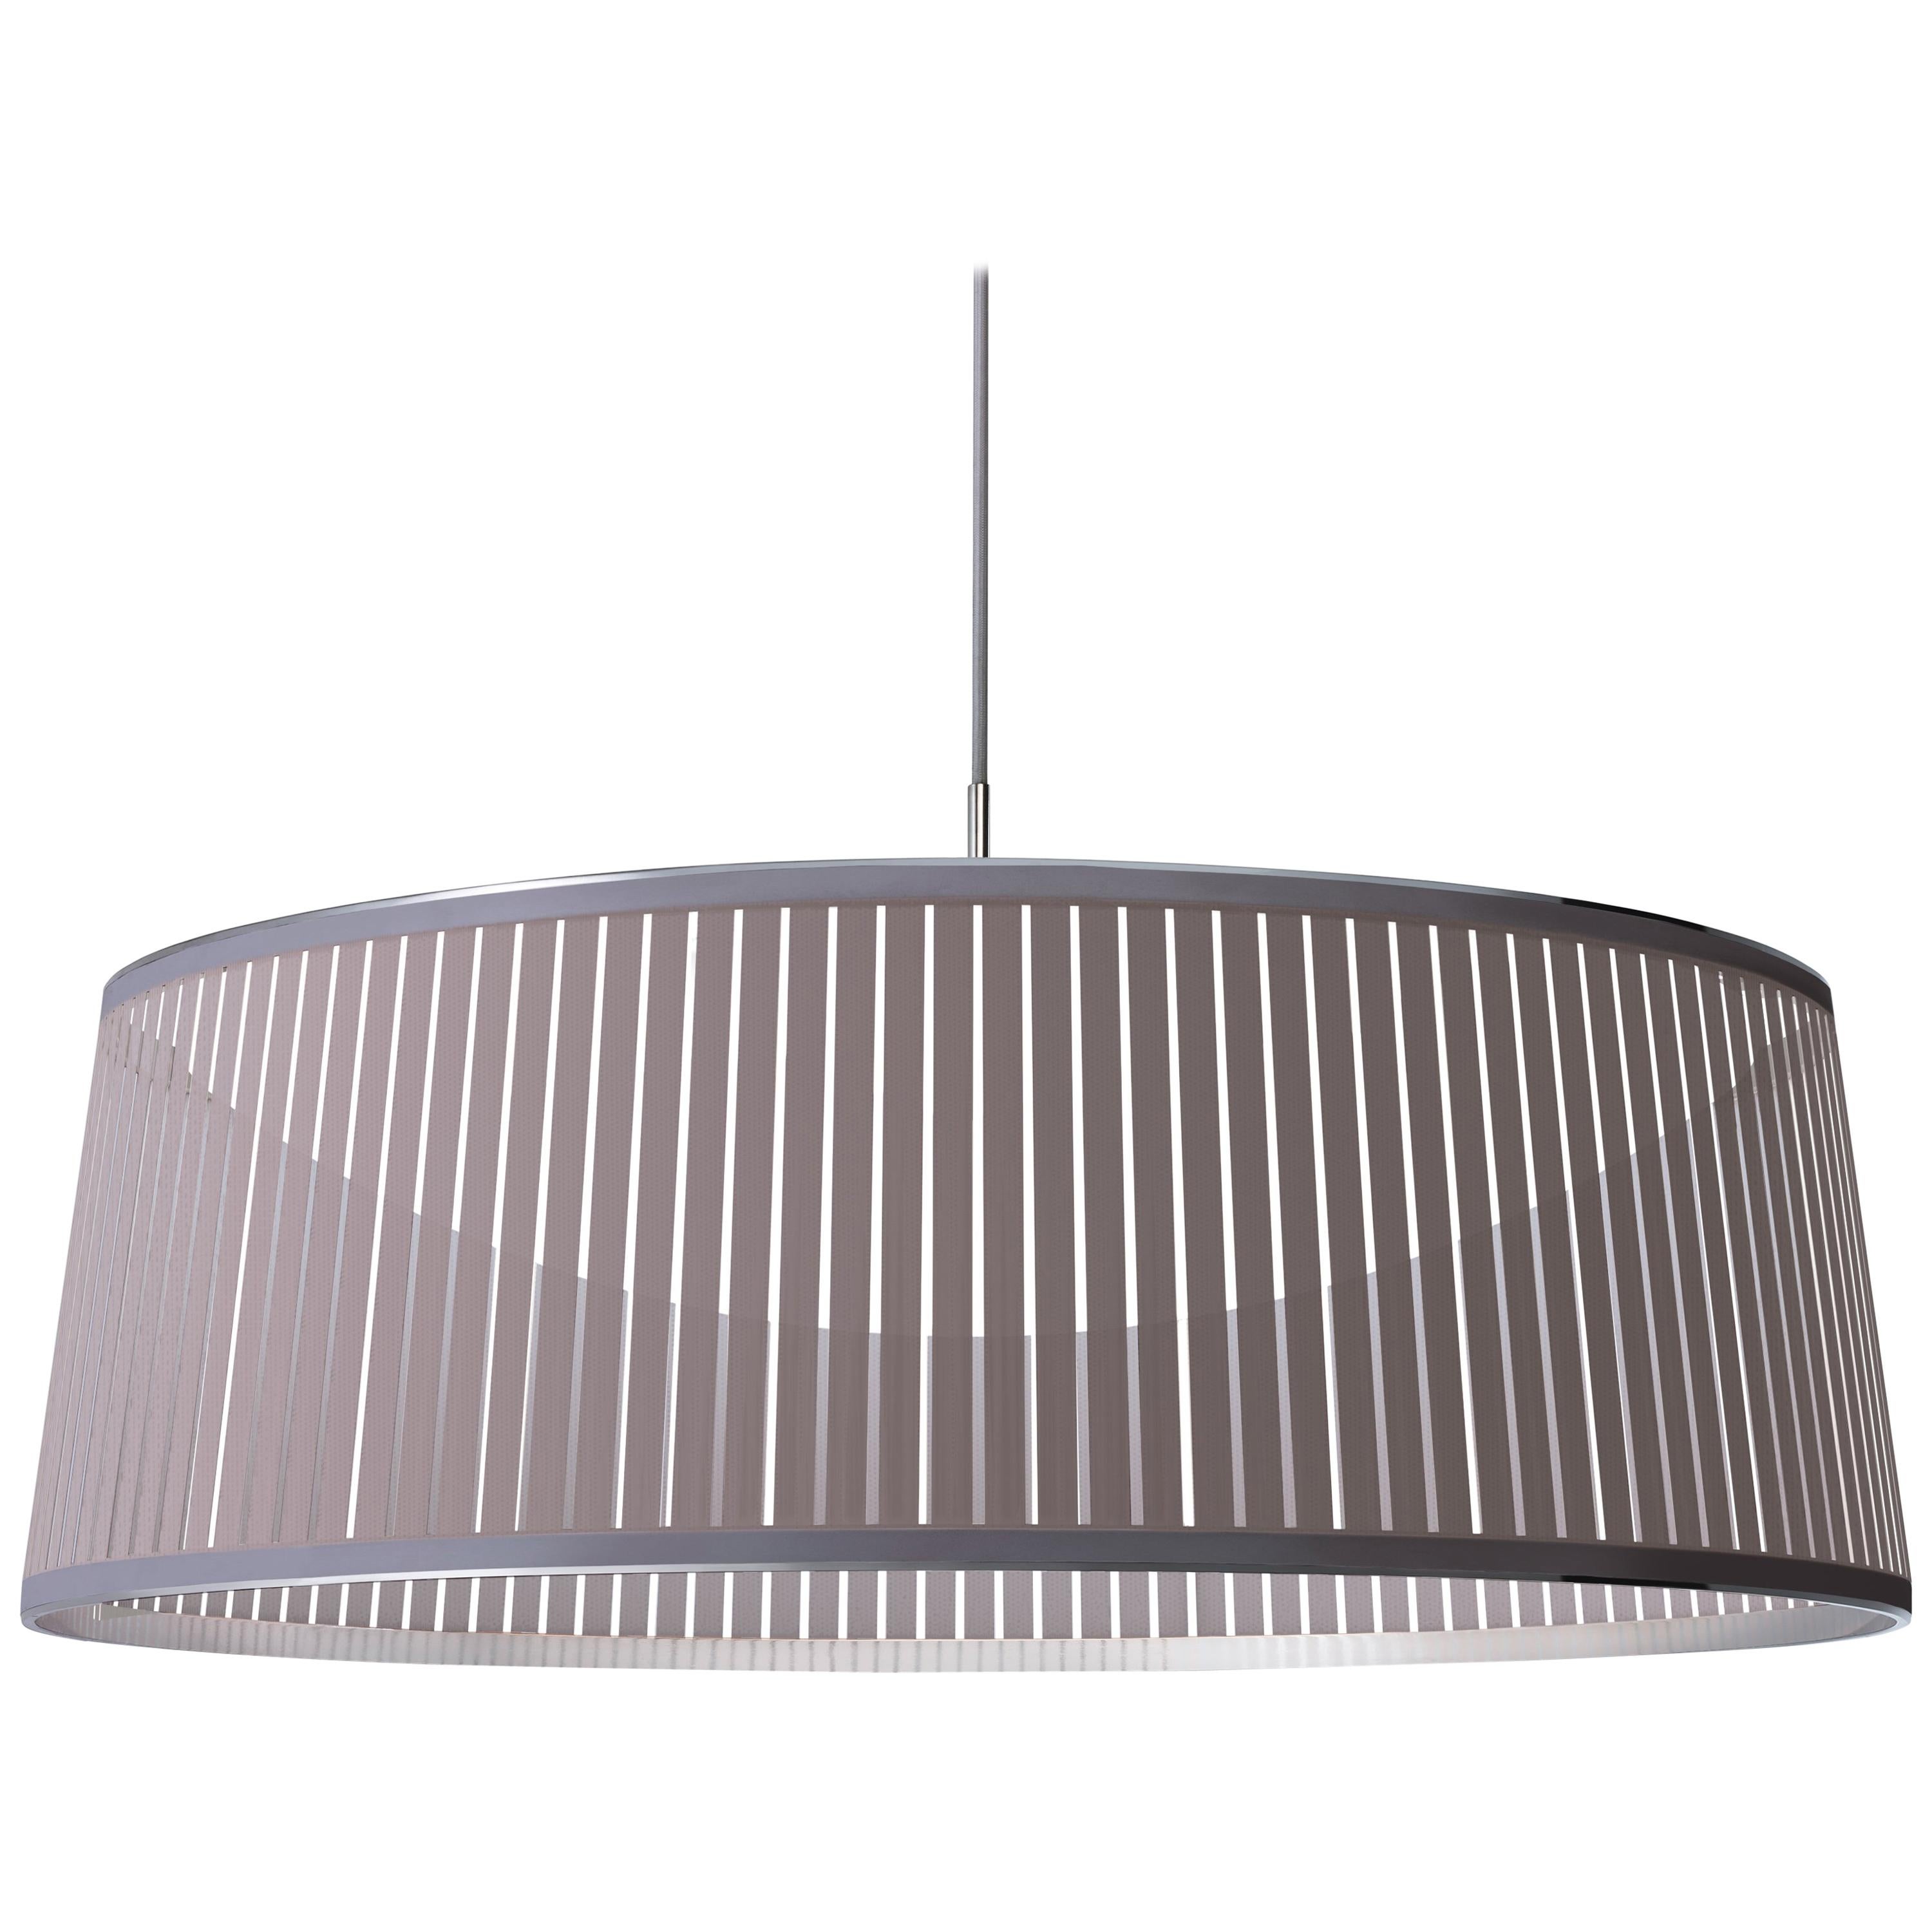 Solis Drum 36 Pendant Light in Silver by Pablo Designs For Sale